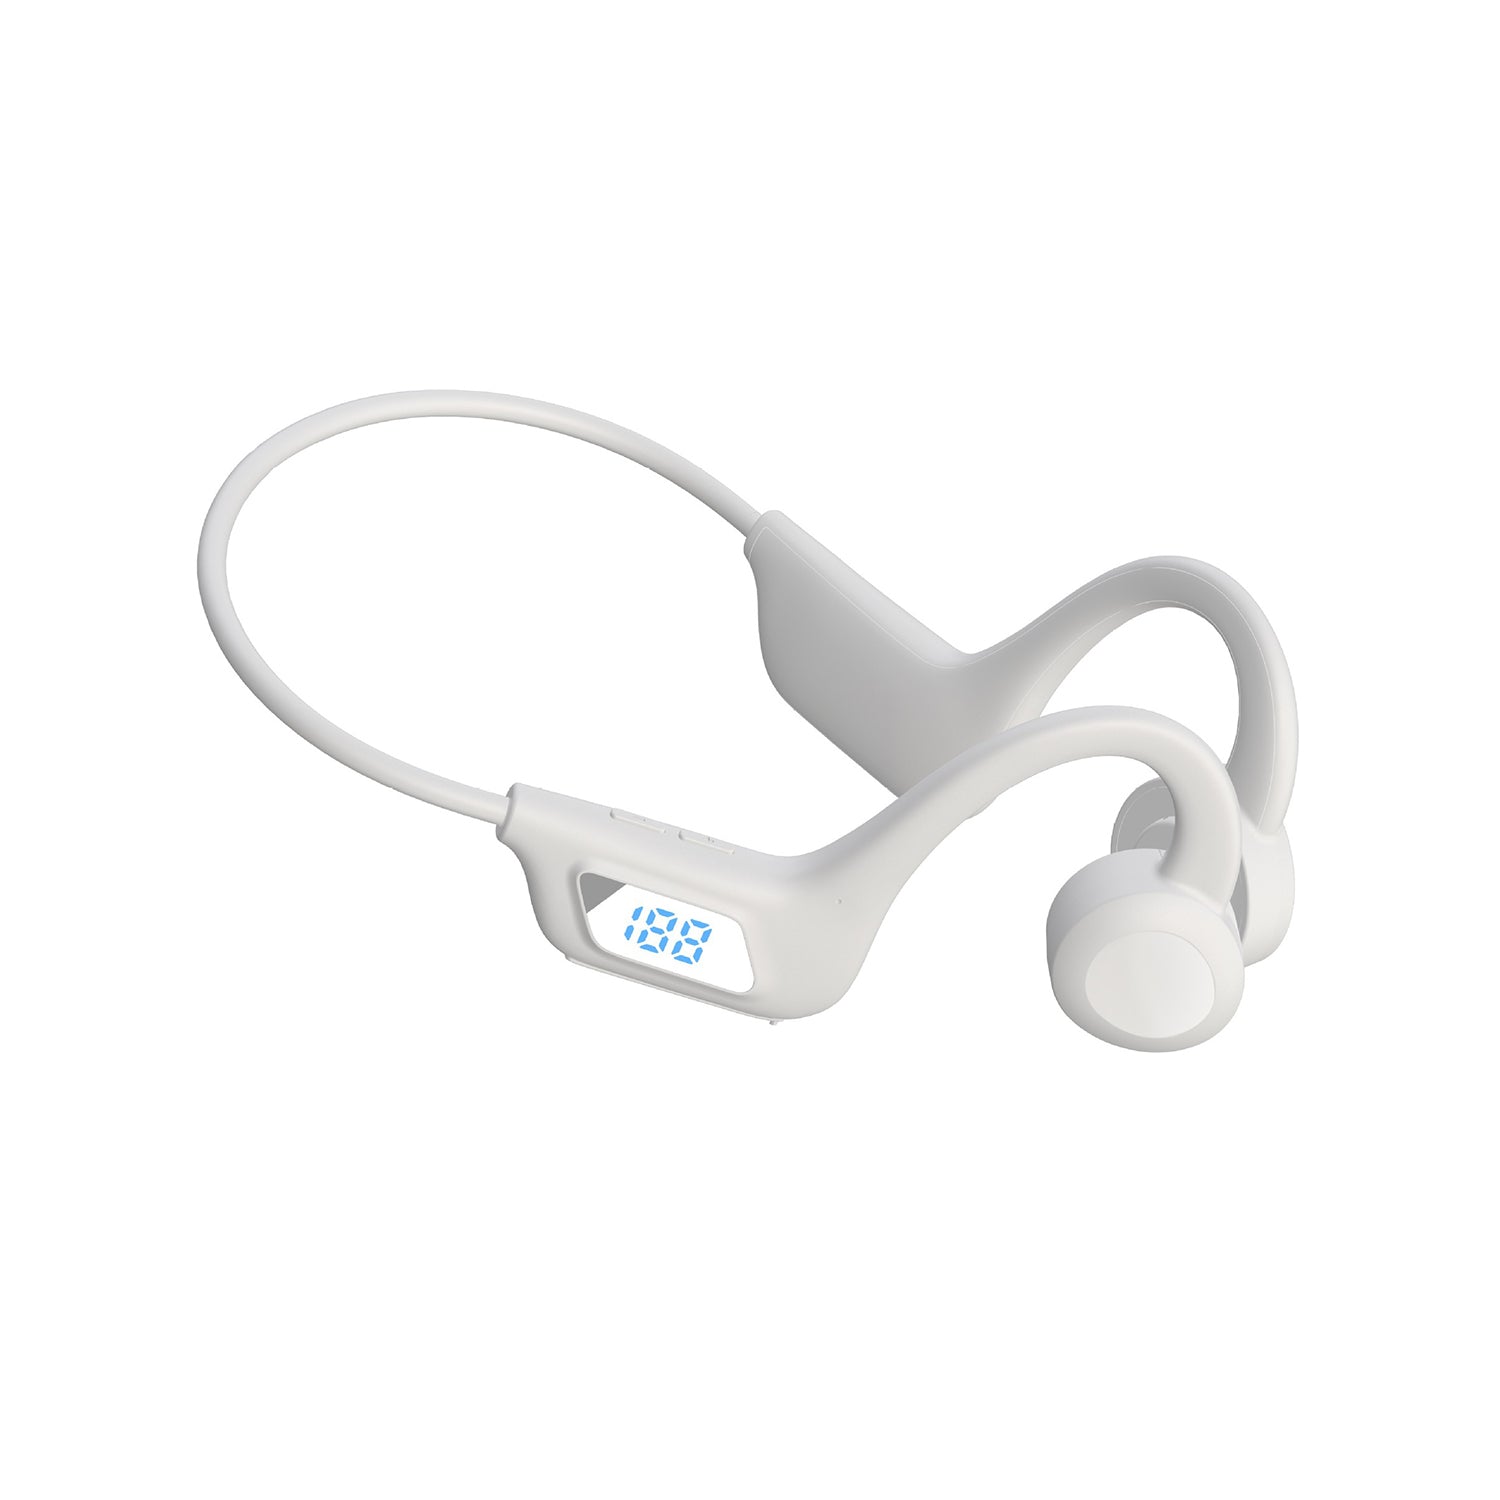 Blutooth sports close to ear headphones (not in-ear)